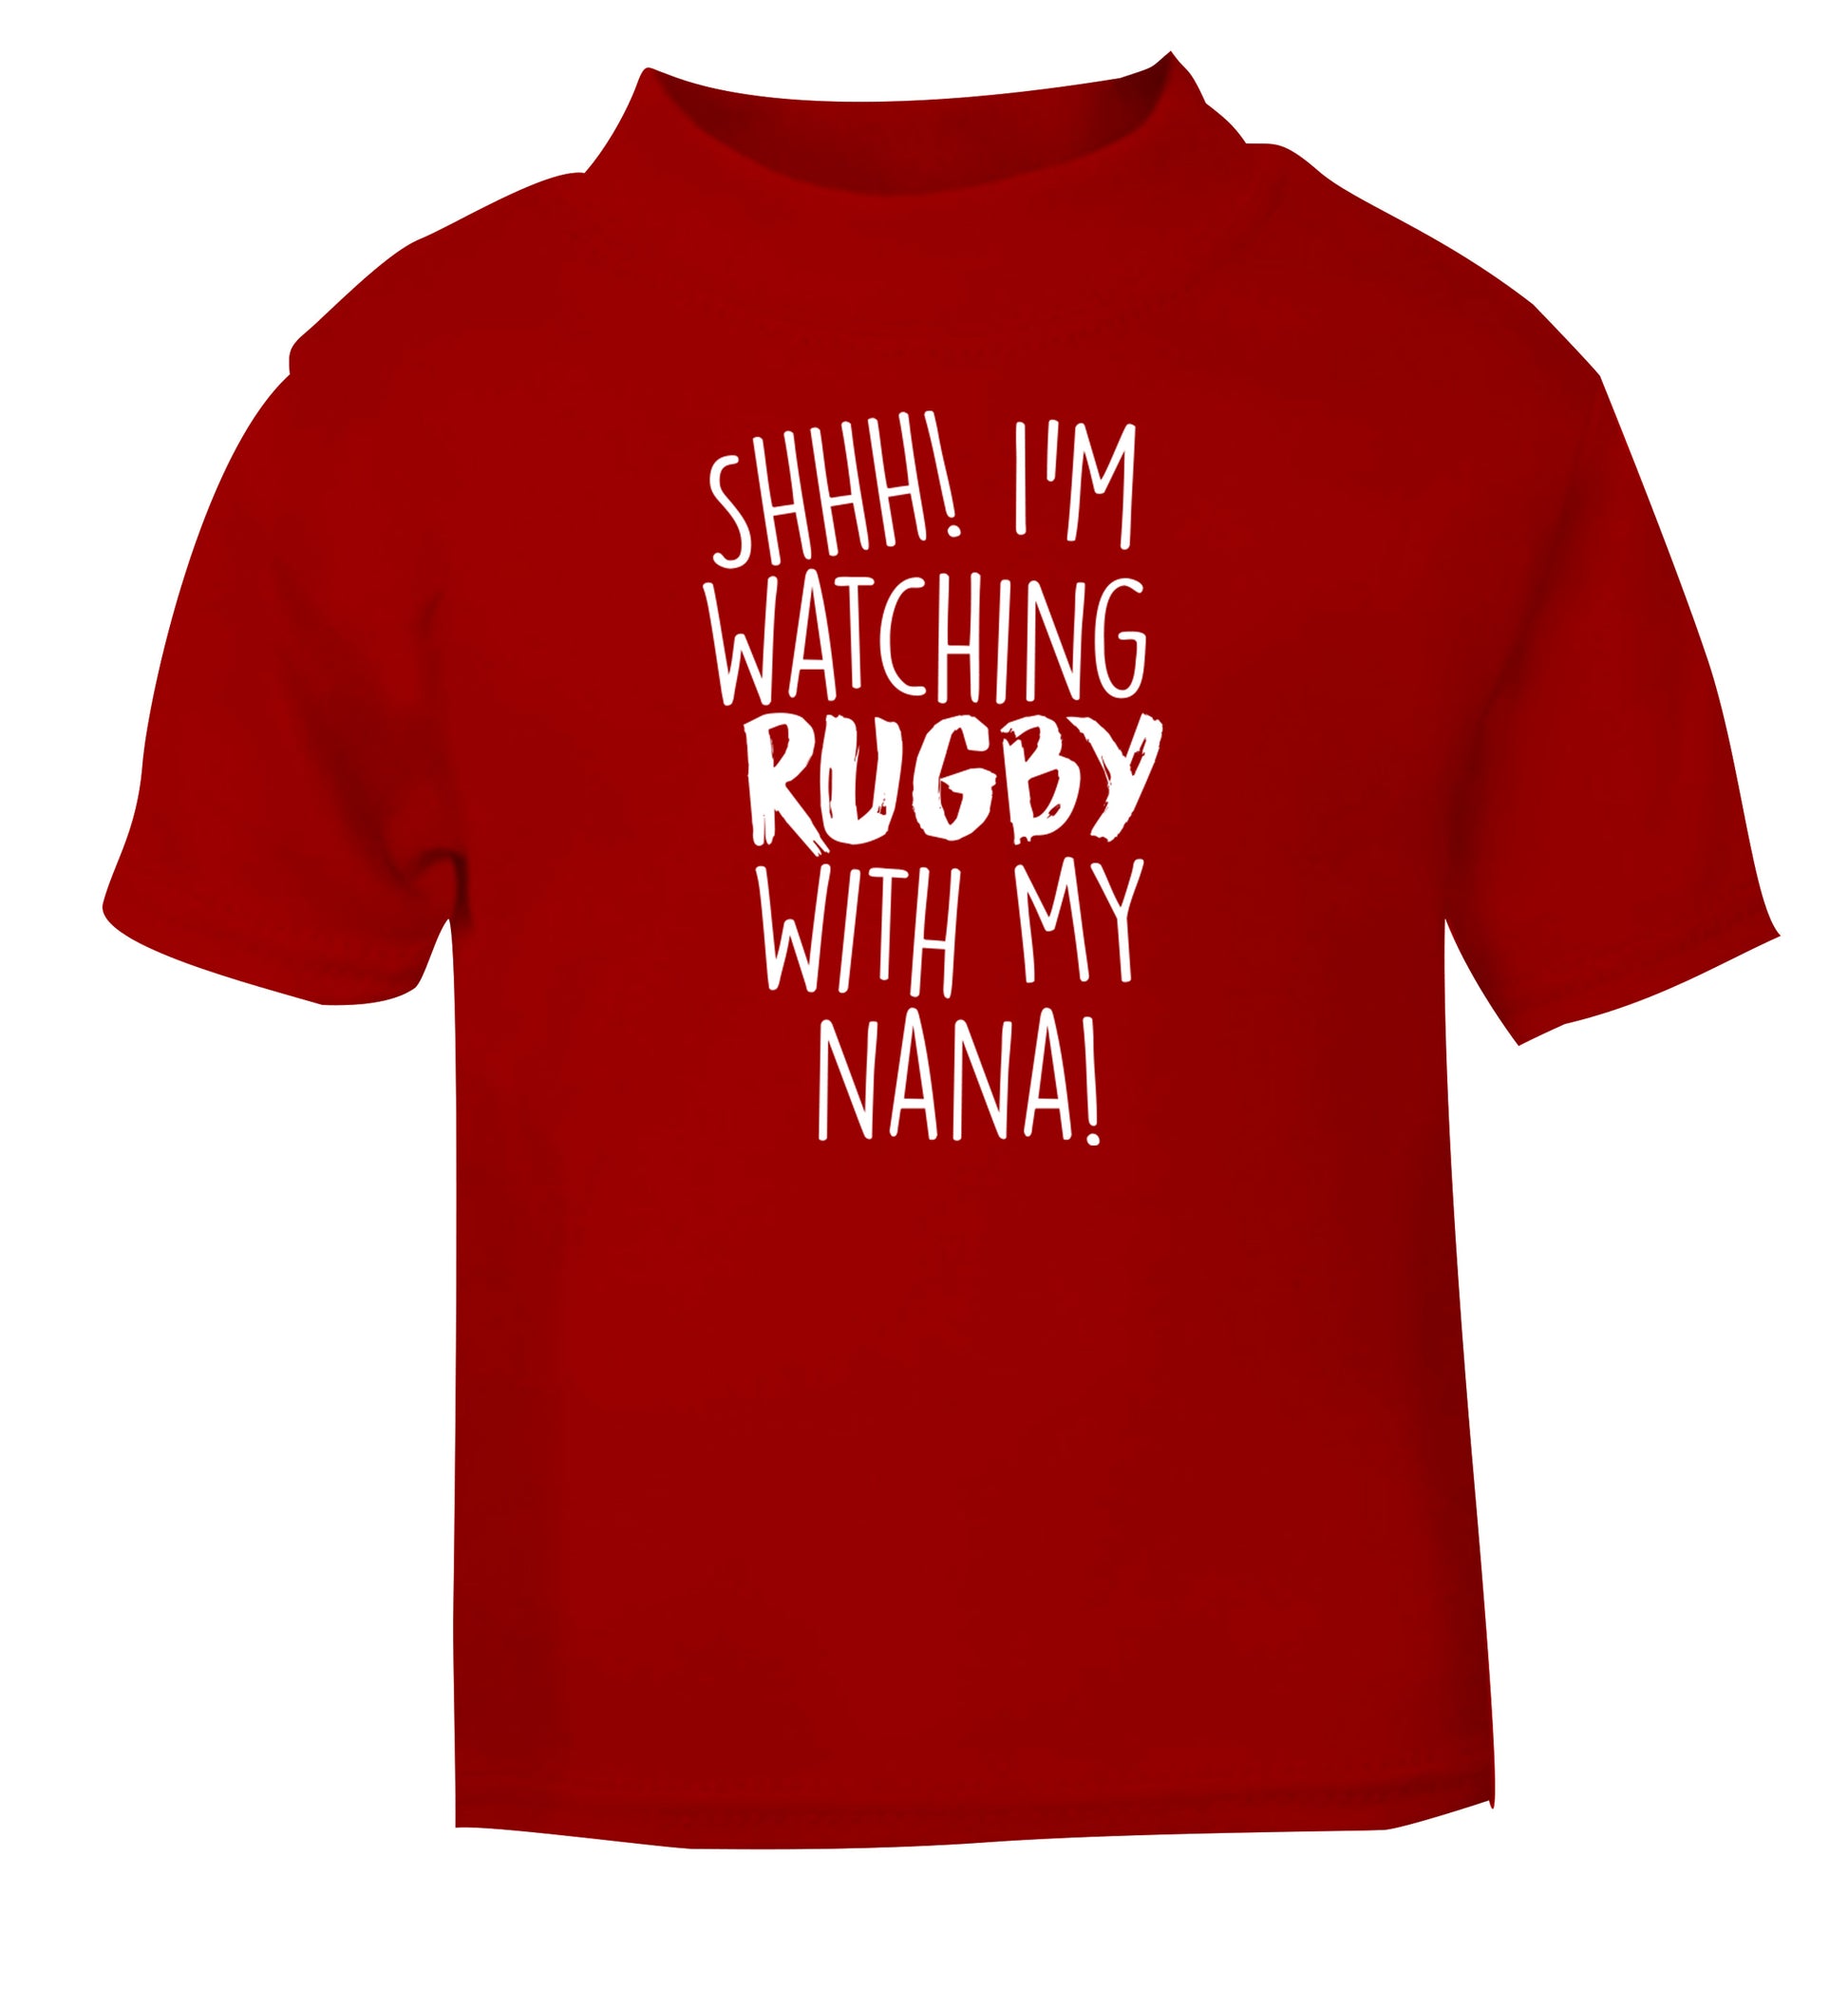 Shh I'm watching rugby with my nana red Baby Toddler Tshirt 2 Years